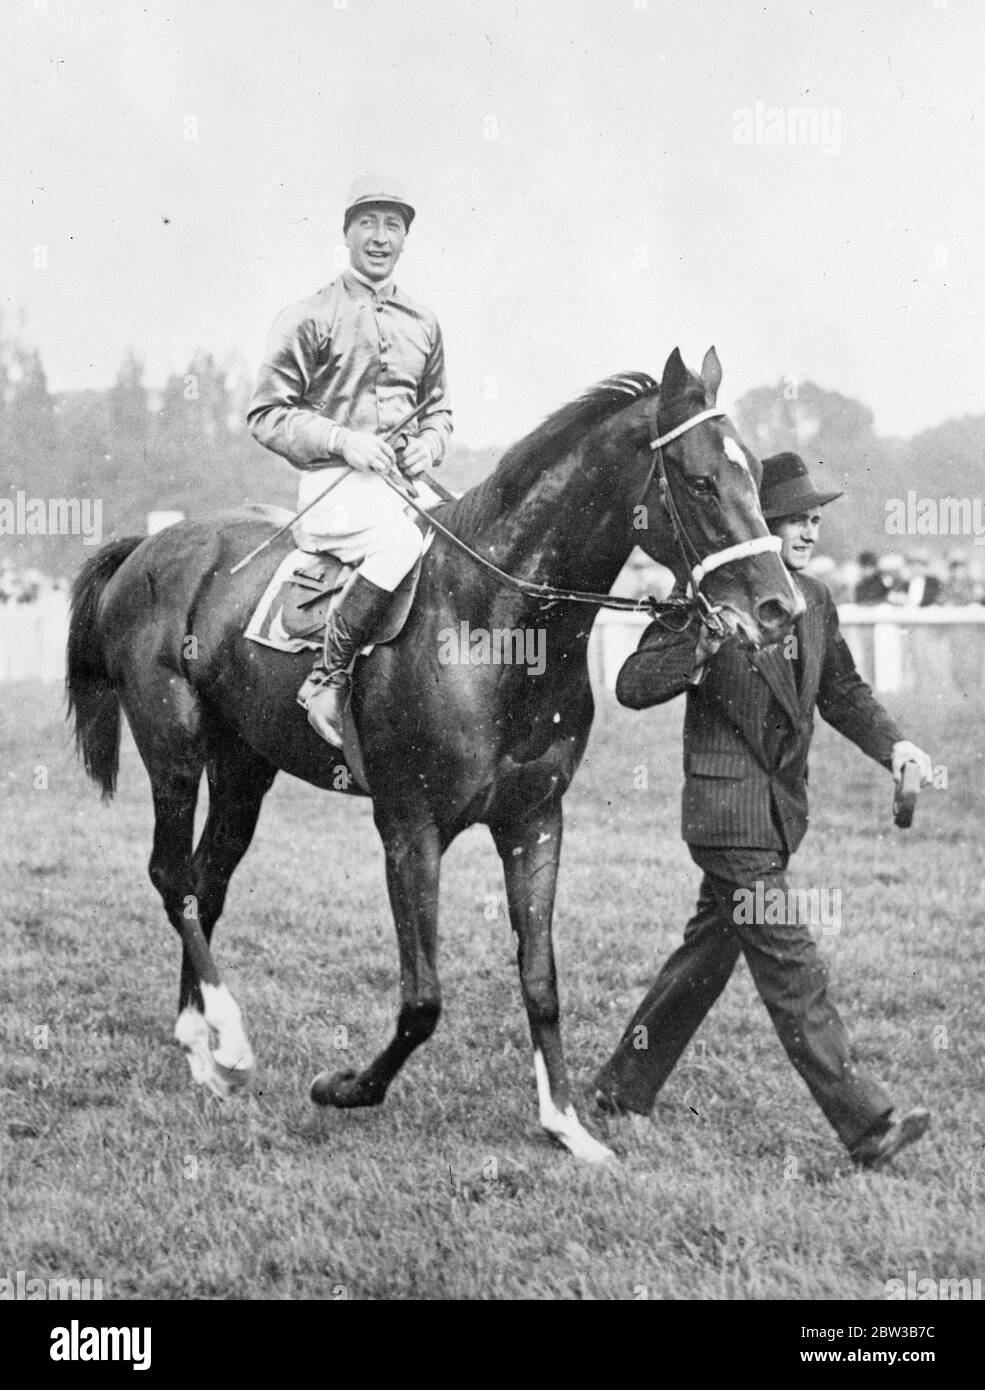 Brantome , France 's unbeaten 3 year old racehorse with Rouillon up on saddle . 7 October 1934 . Stock Photo